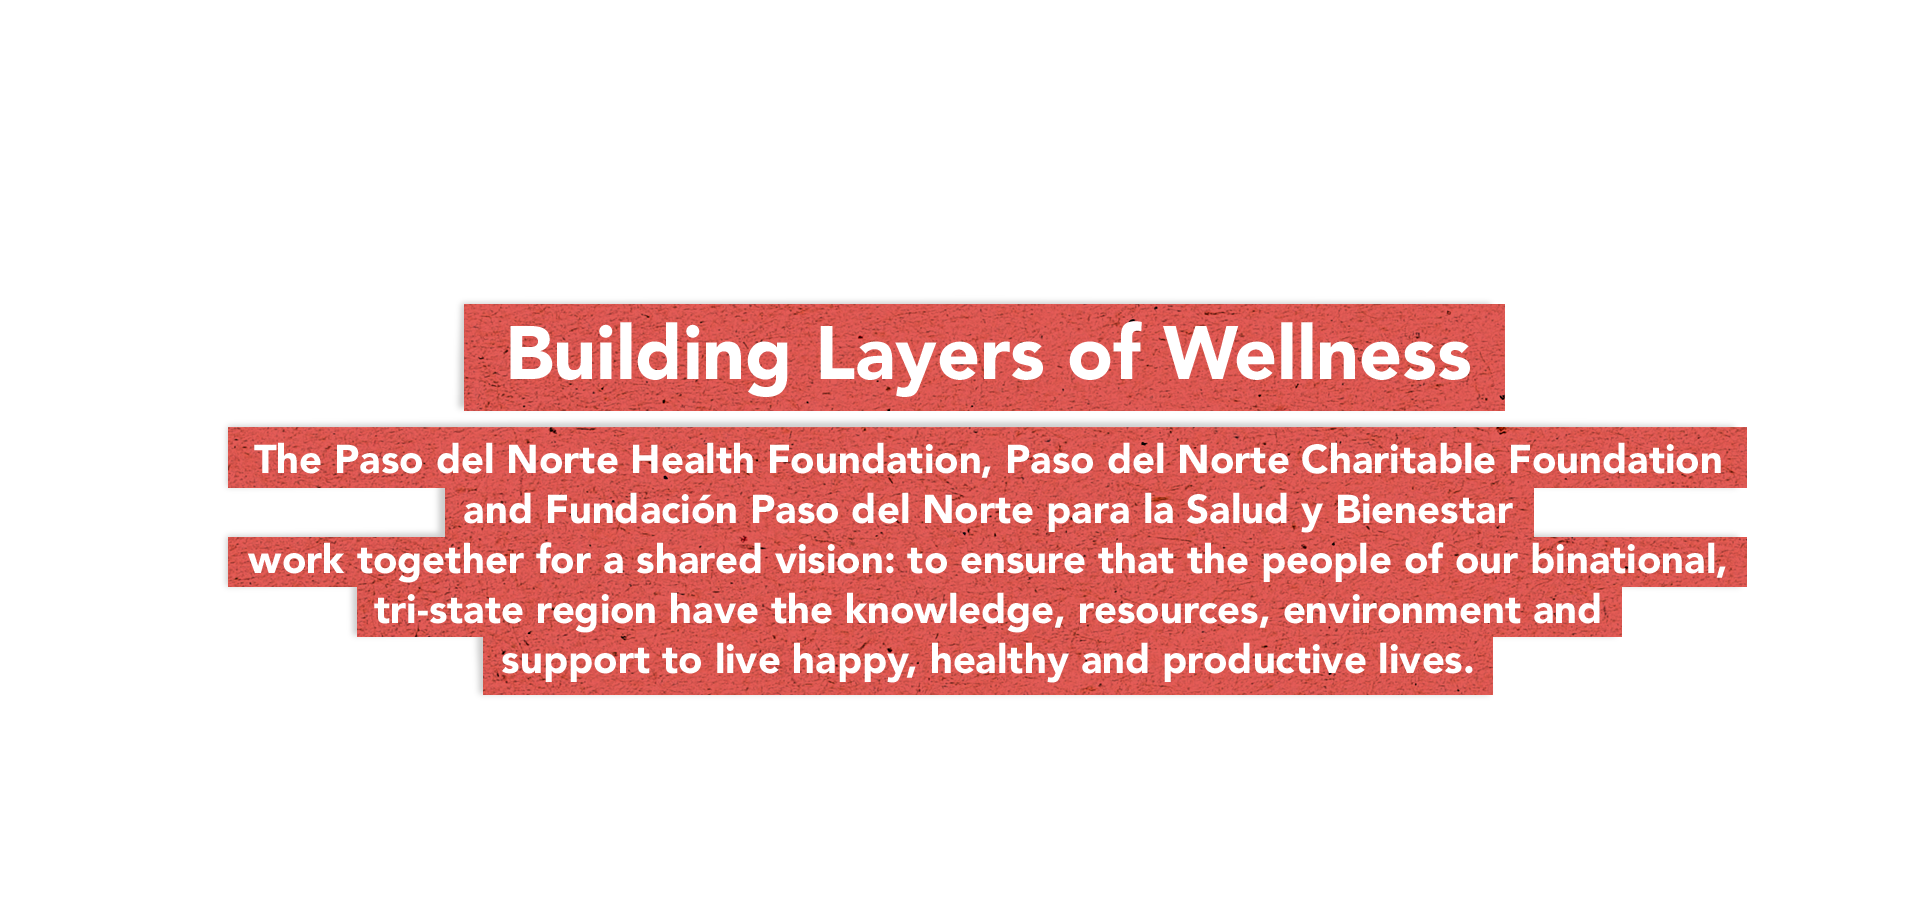 Building Layers of Wellness